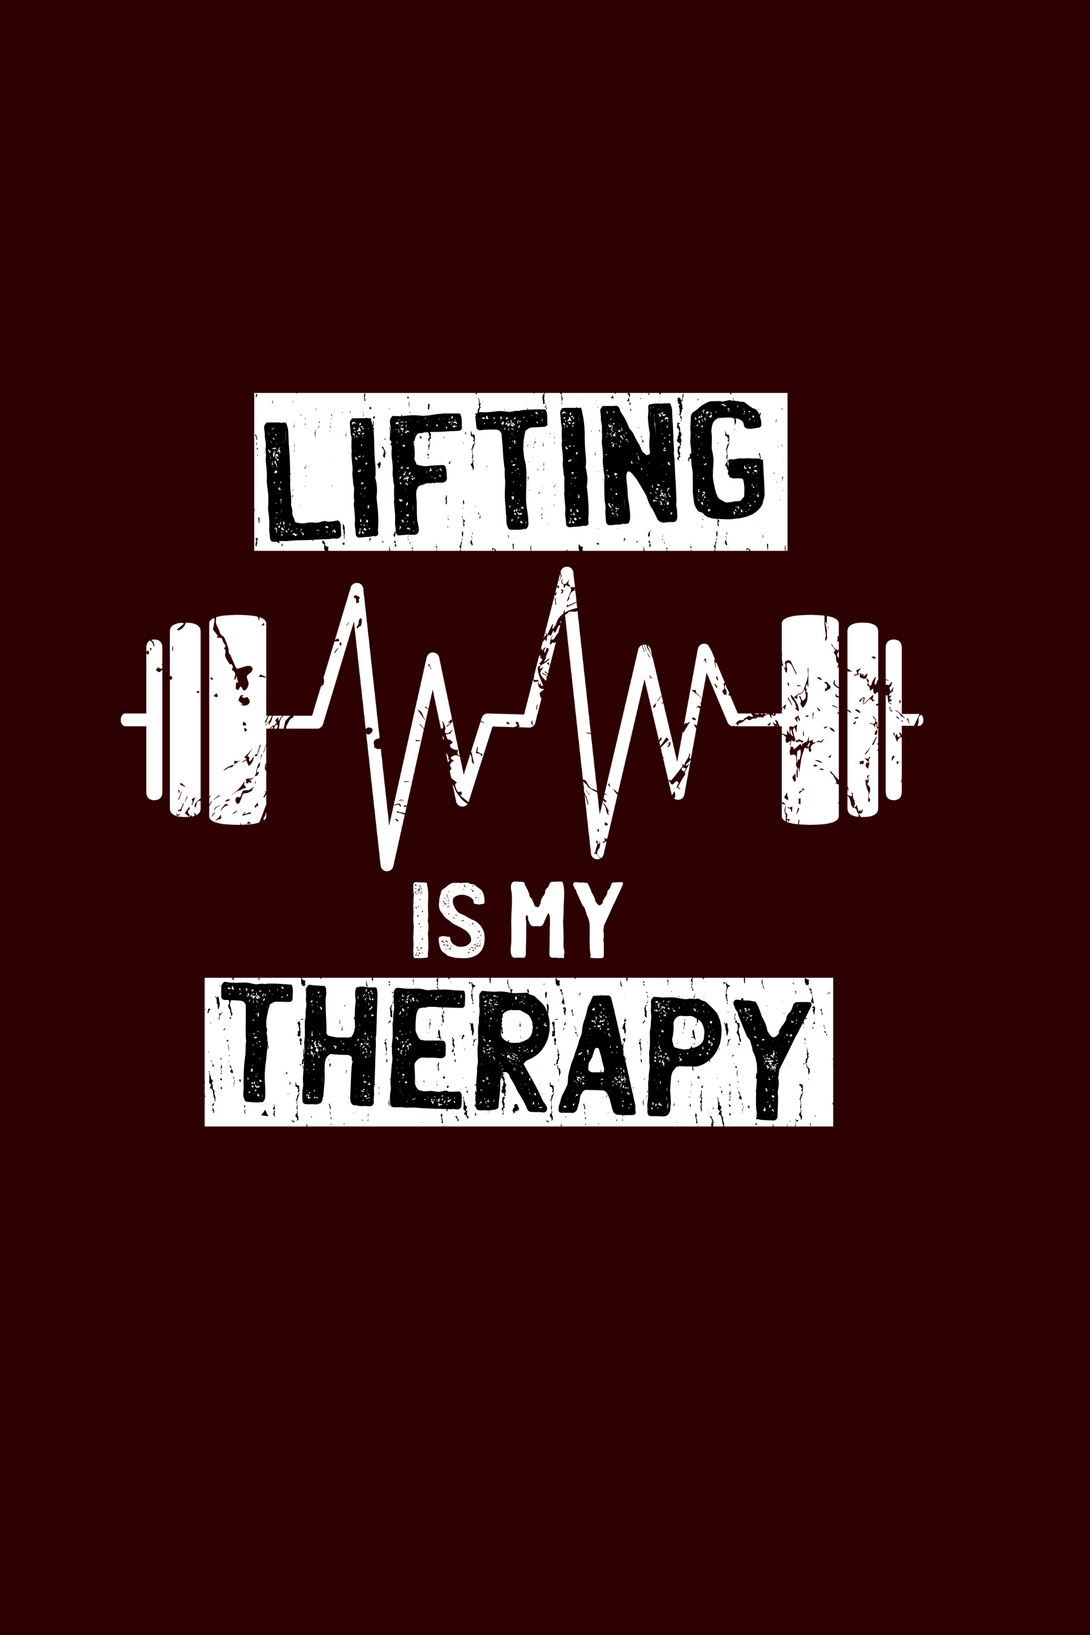 Lifting Is My Therapy Printed T-Shirt For Men - WowWaves - 1